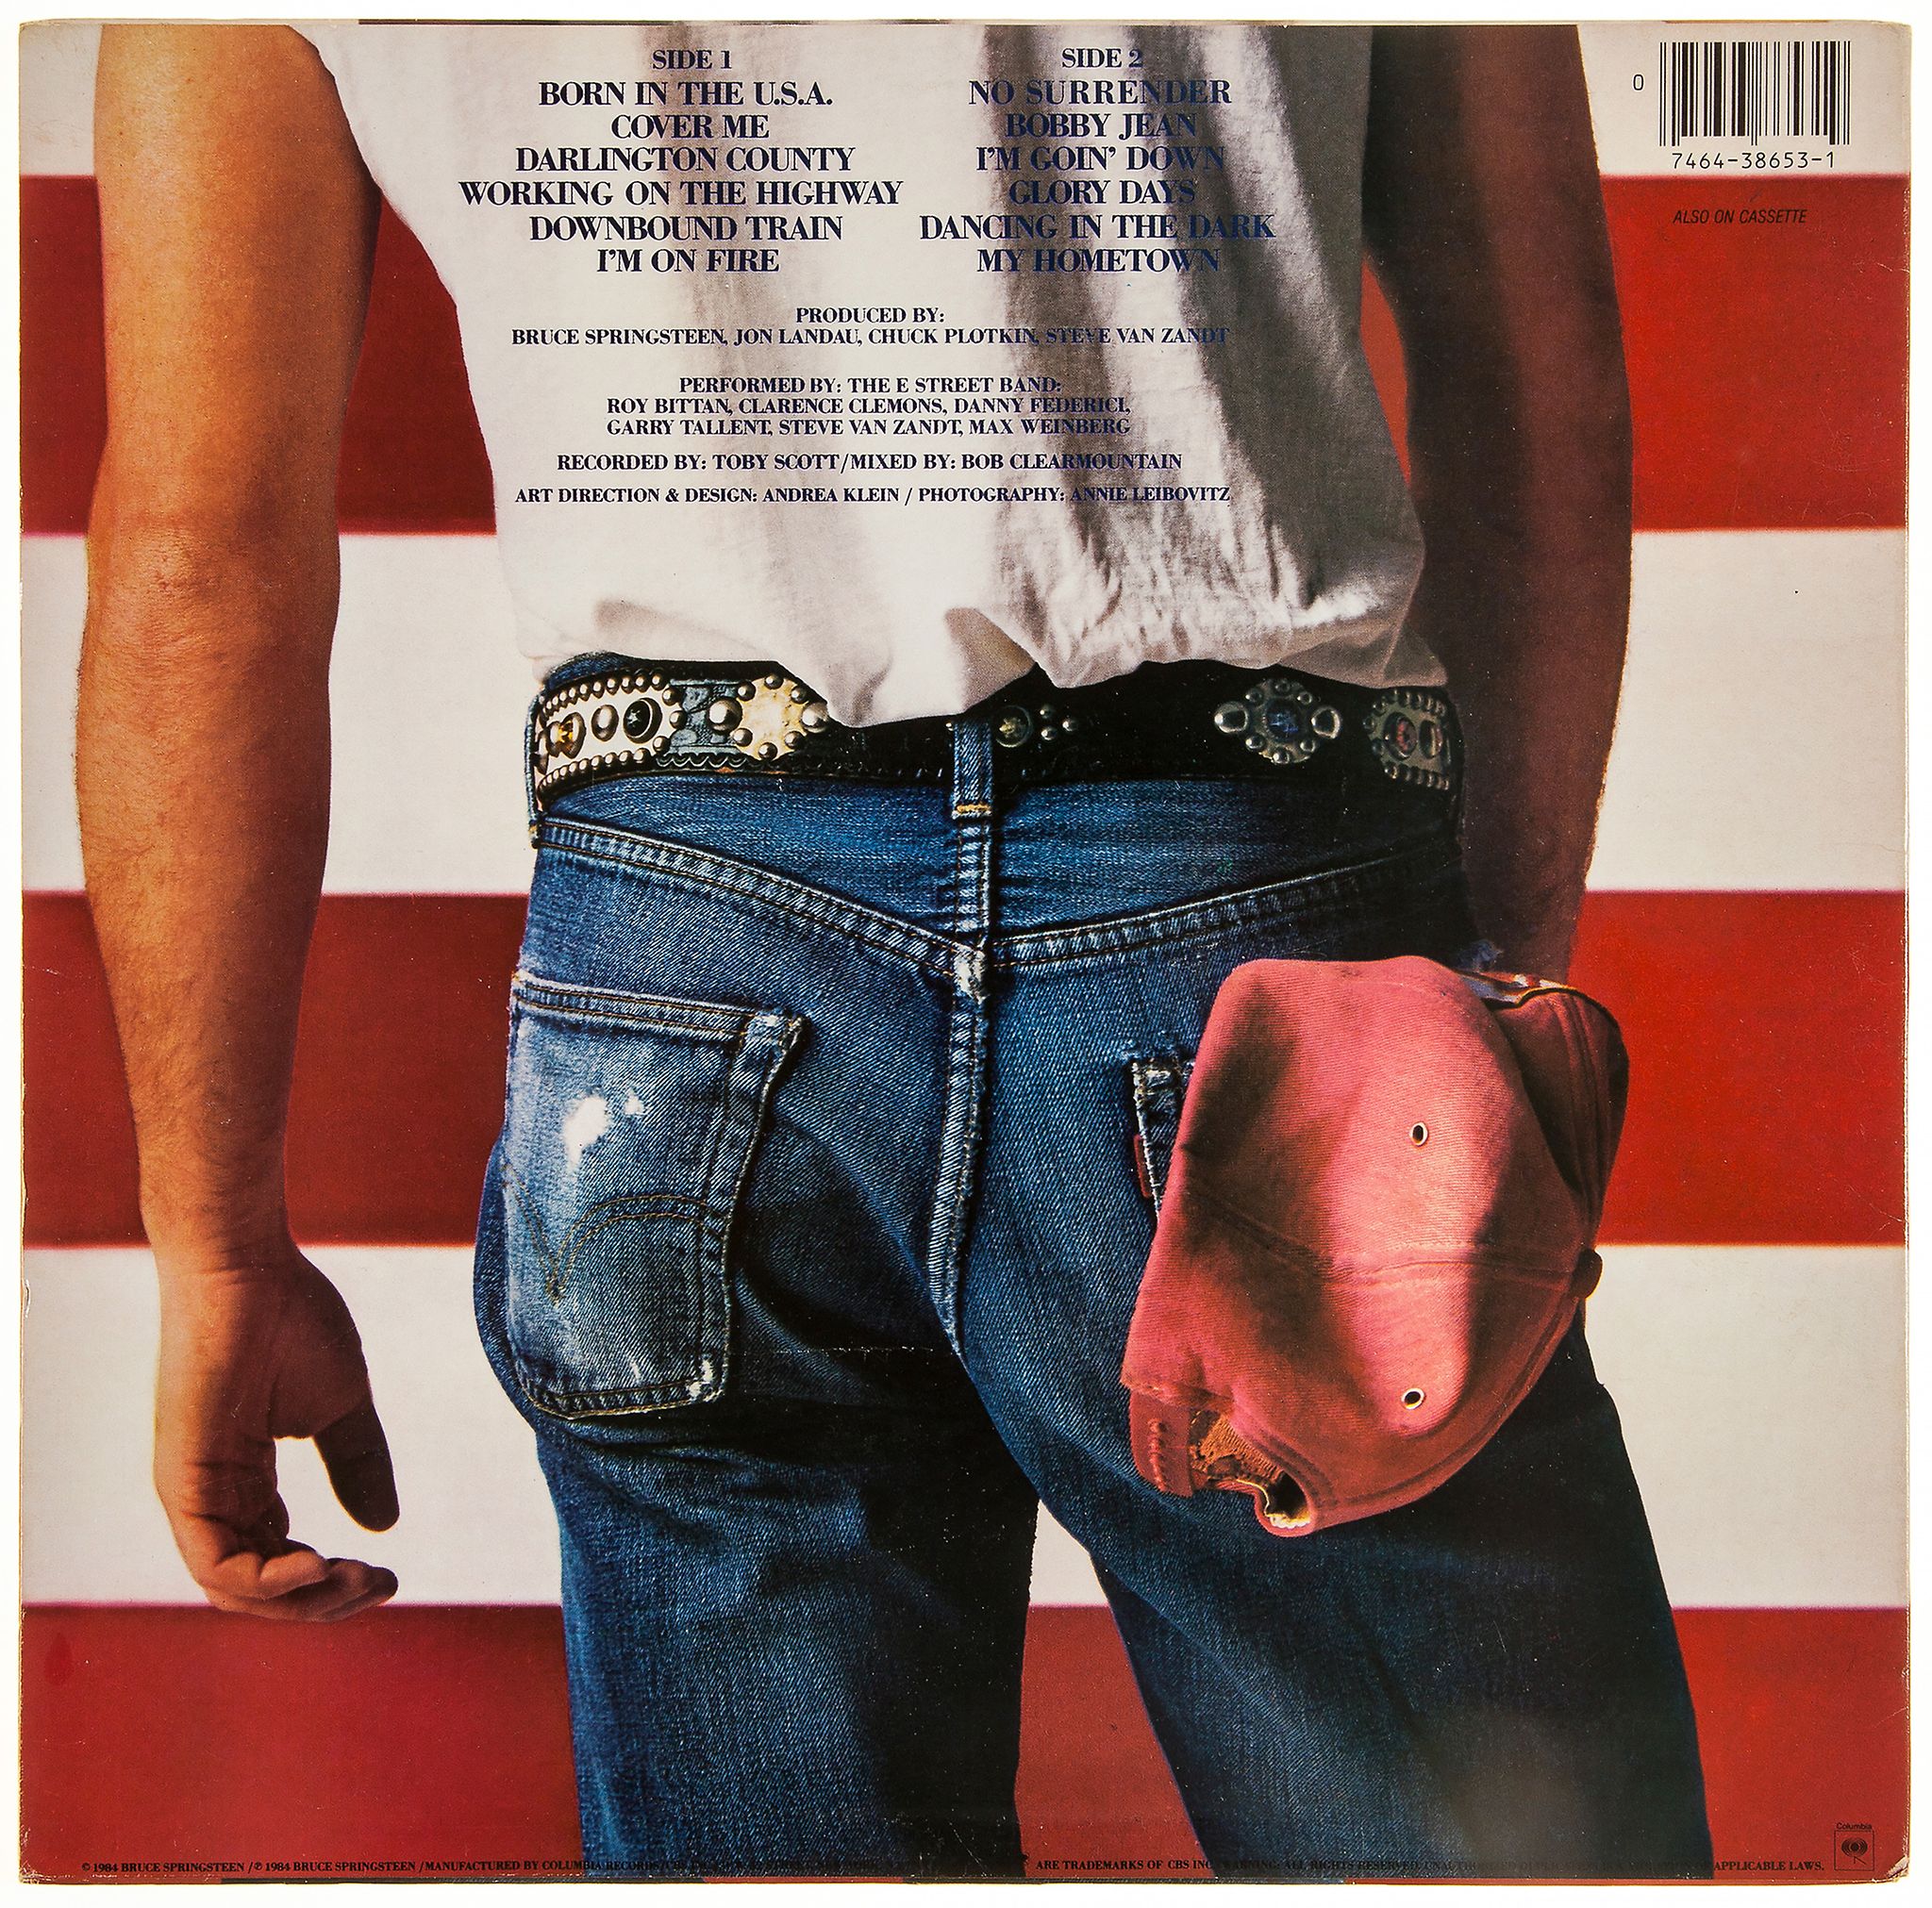 SPRINGSTEEN, BRUCE - 12" vinyl copy of Bruce Springsteen’s LP ‘Born in The USA’ signed... 12" - Image 2 of 2